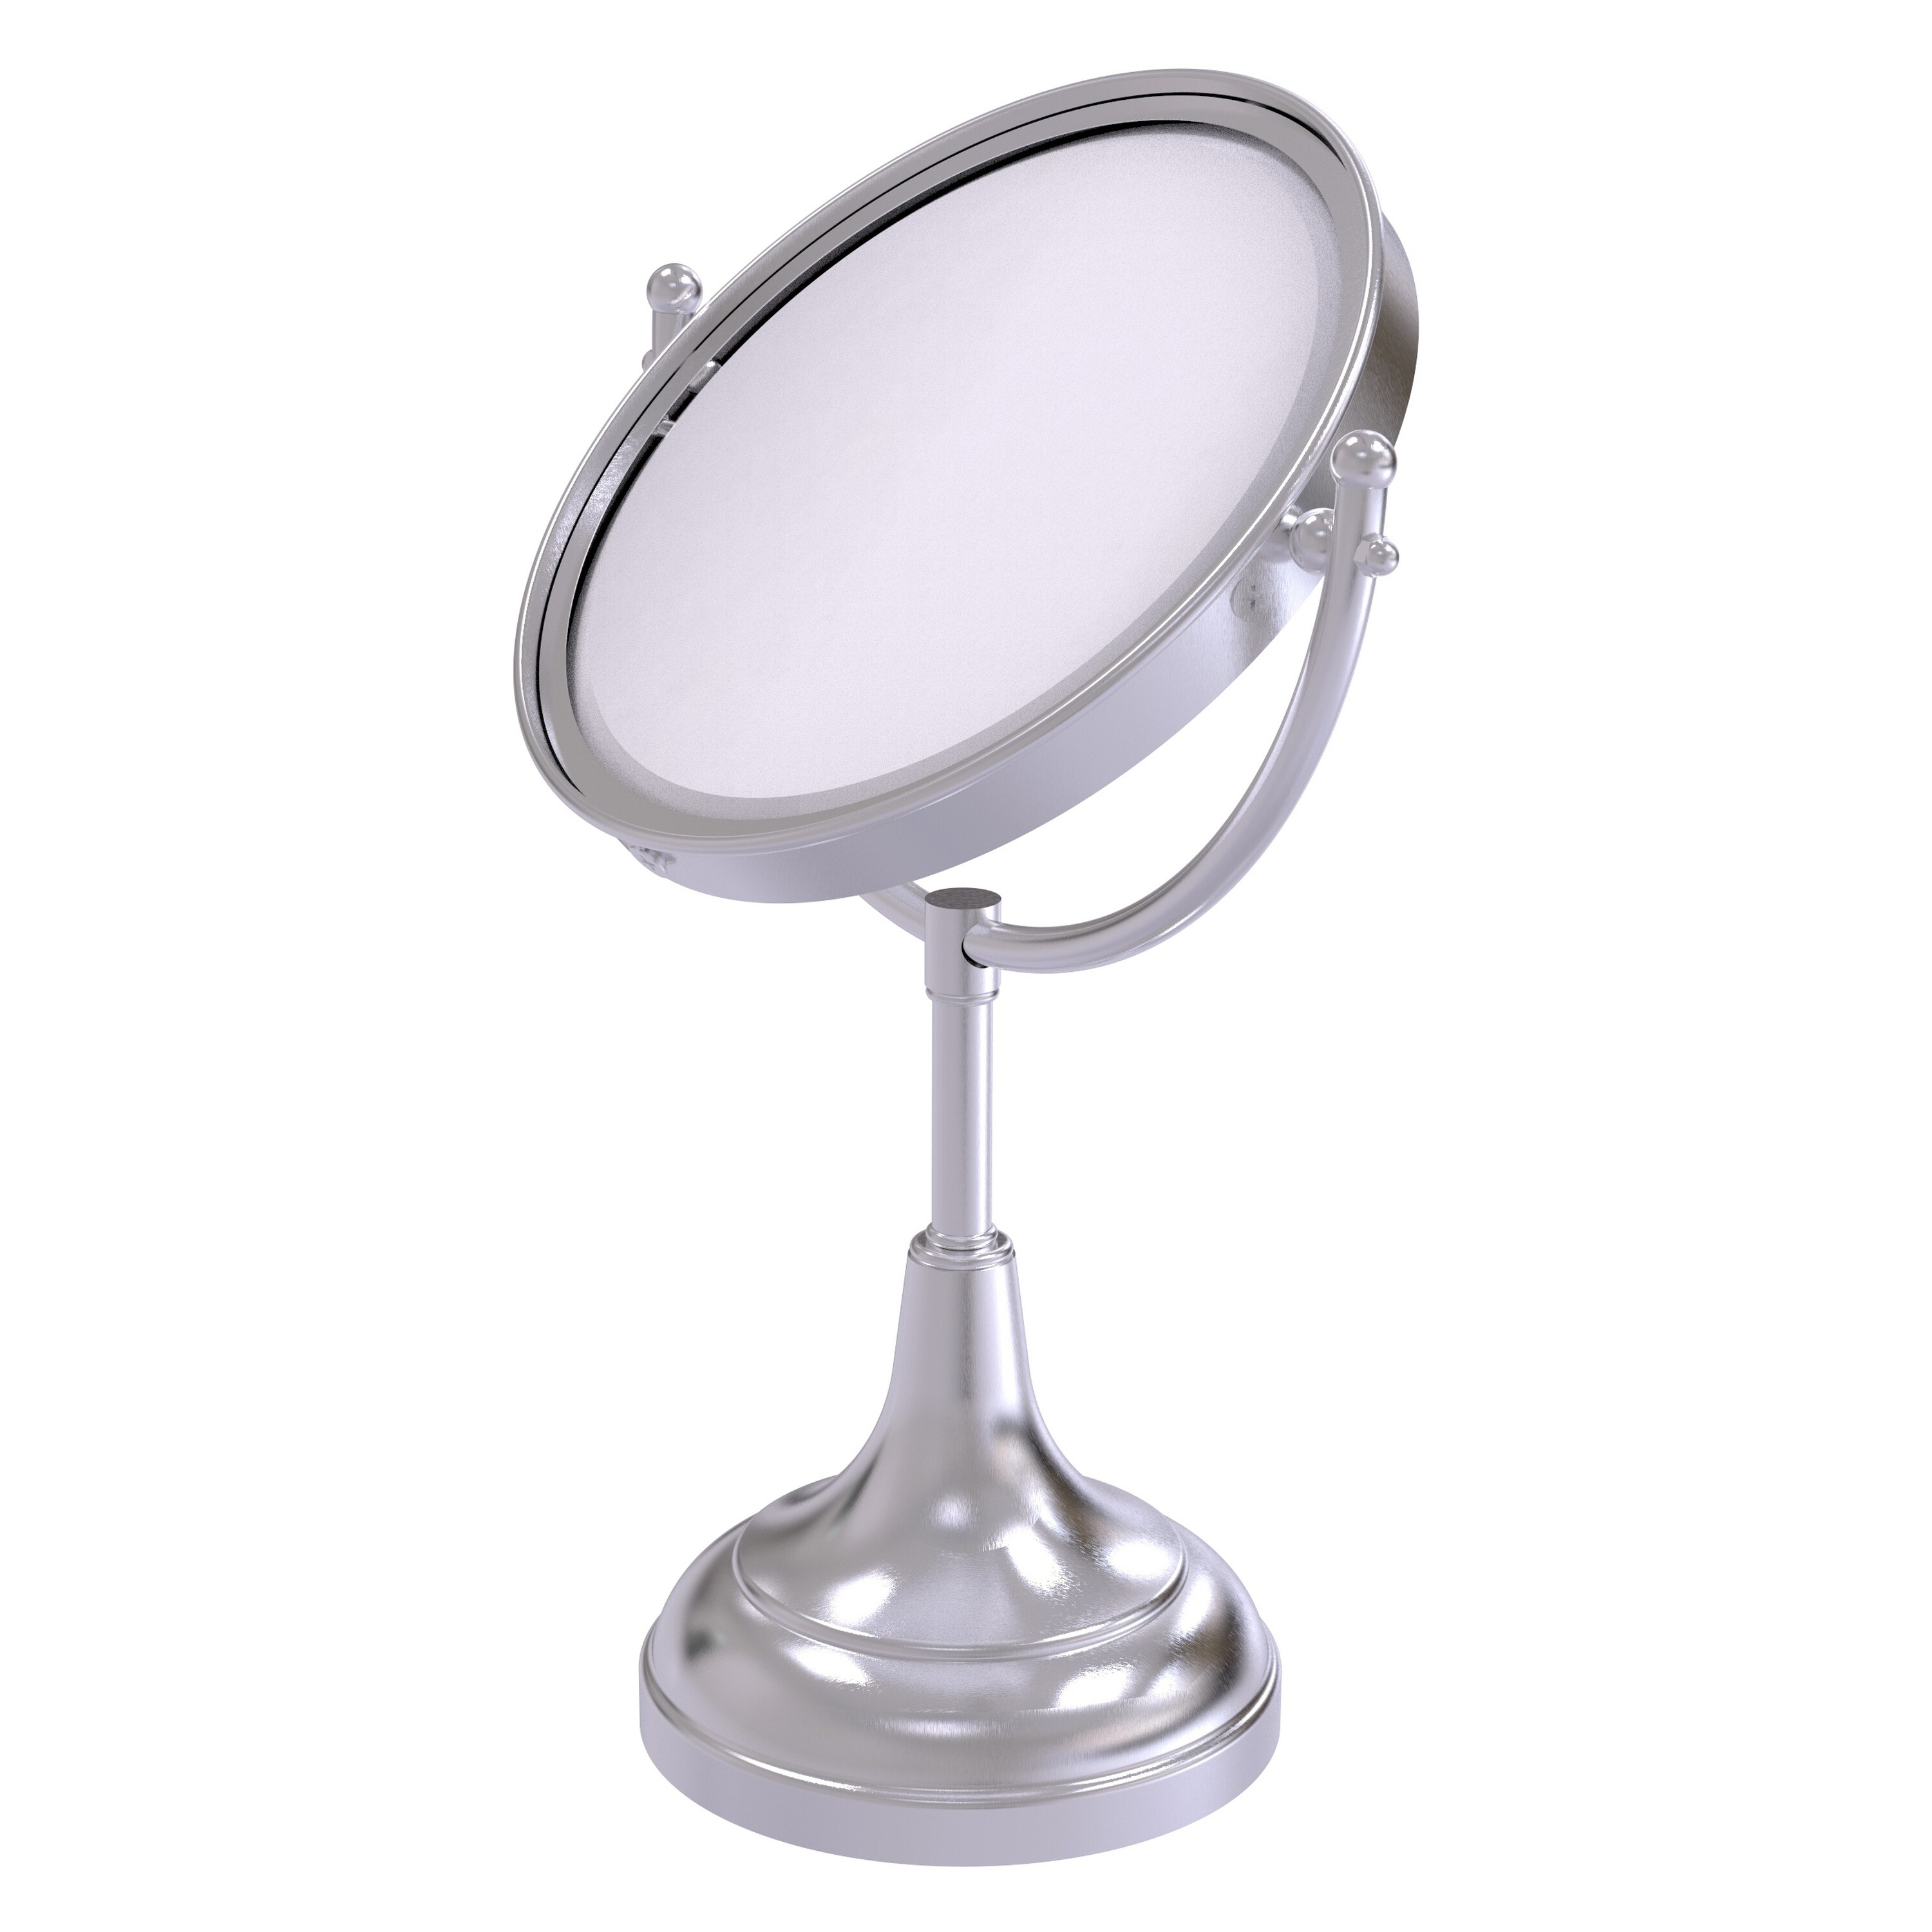 8-in x 15-in Satin Chrome Double-sided 5X Magnifying Countertop Vanity Mirror | - Allied Brass DM-2/4X-SCH